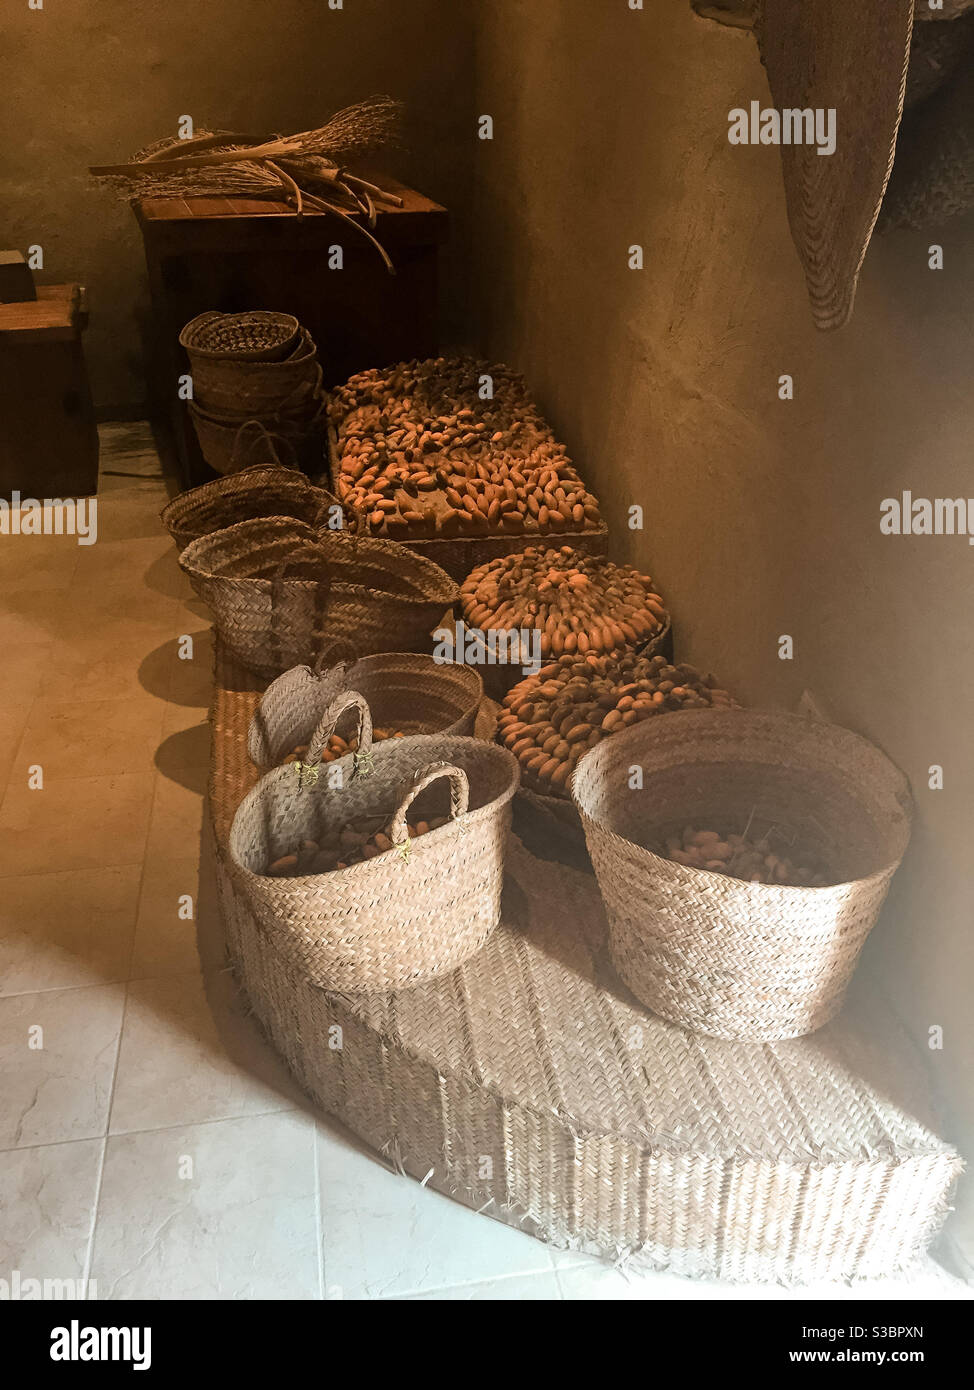 Baskets of food supplies Stock Photo